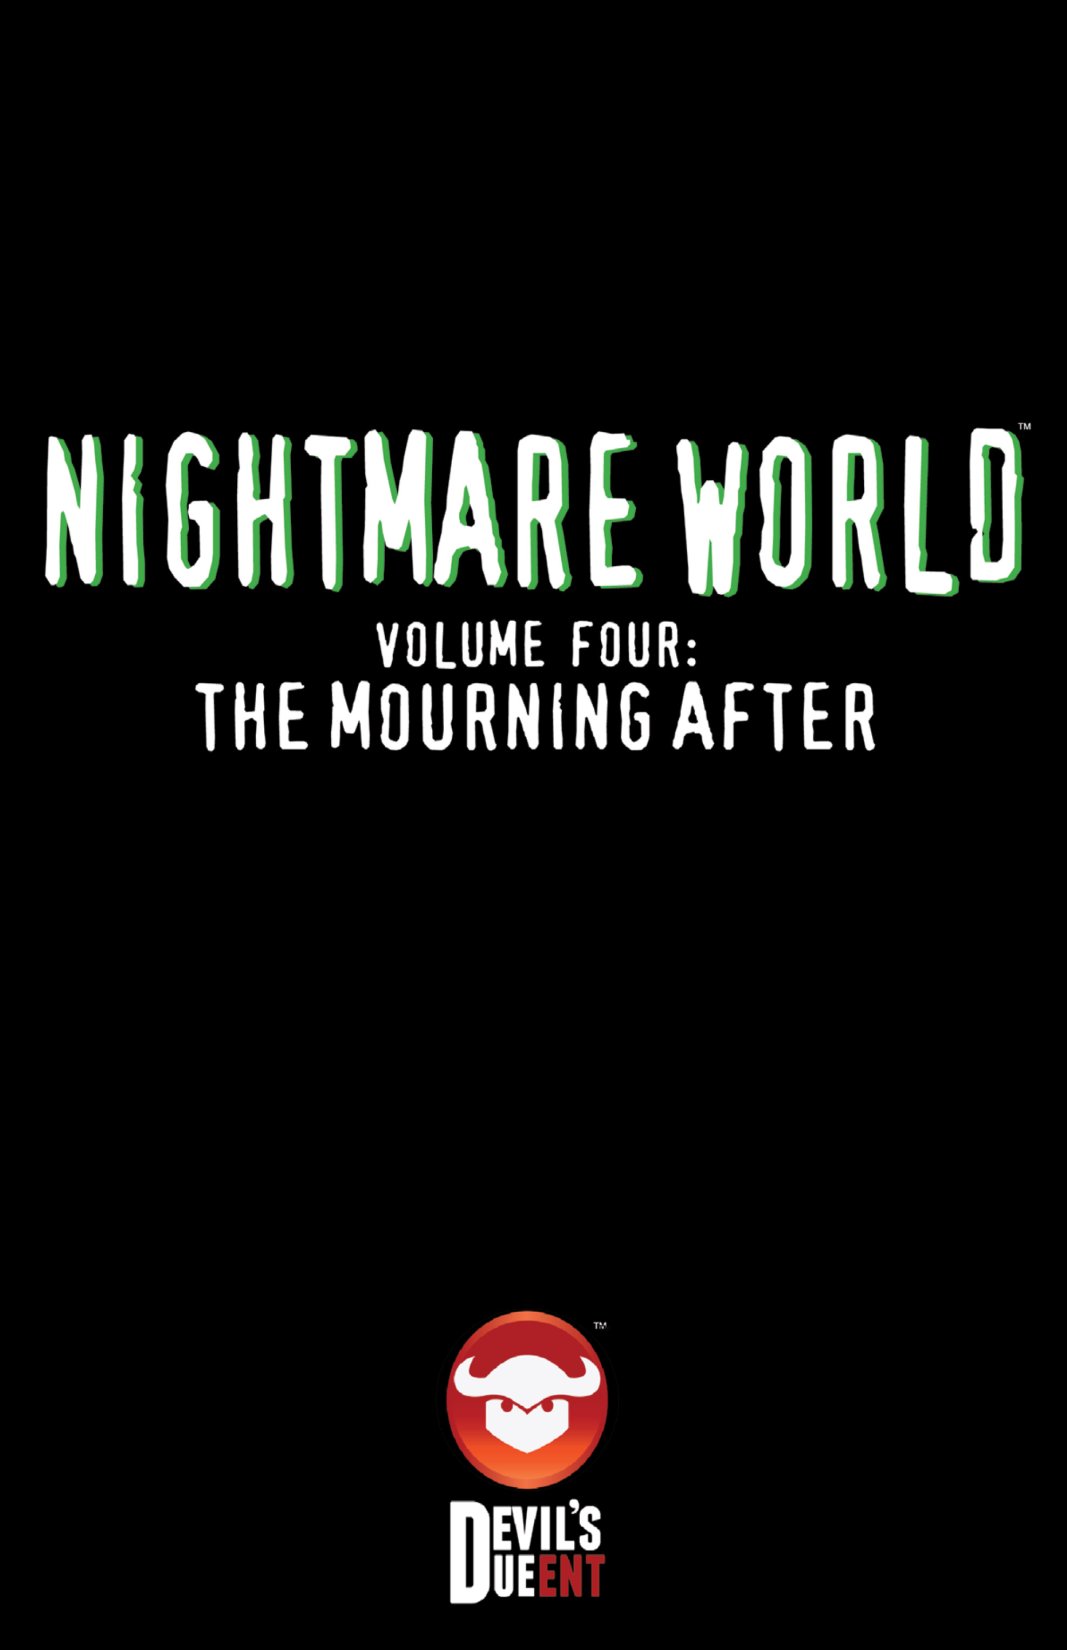 Read online Nightmare World comic -  Issue # Vol. 4 The Mourning After - 2